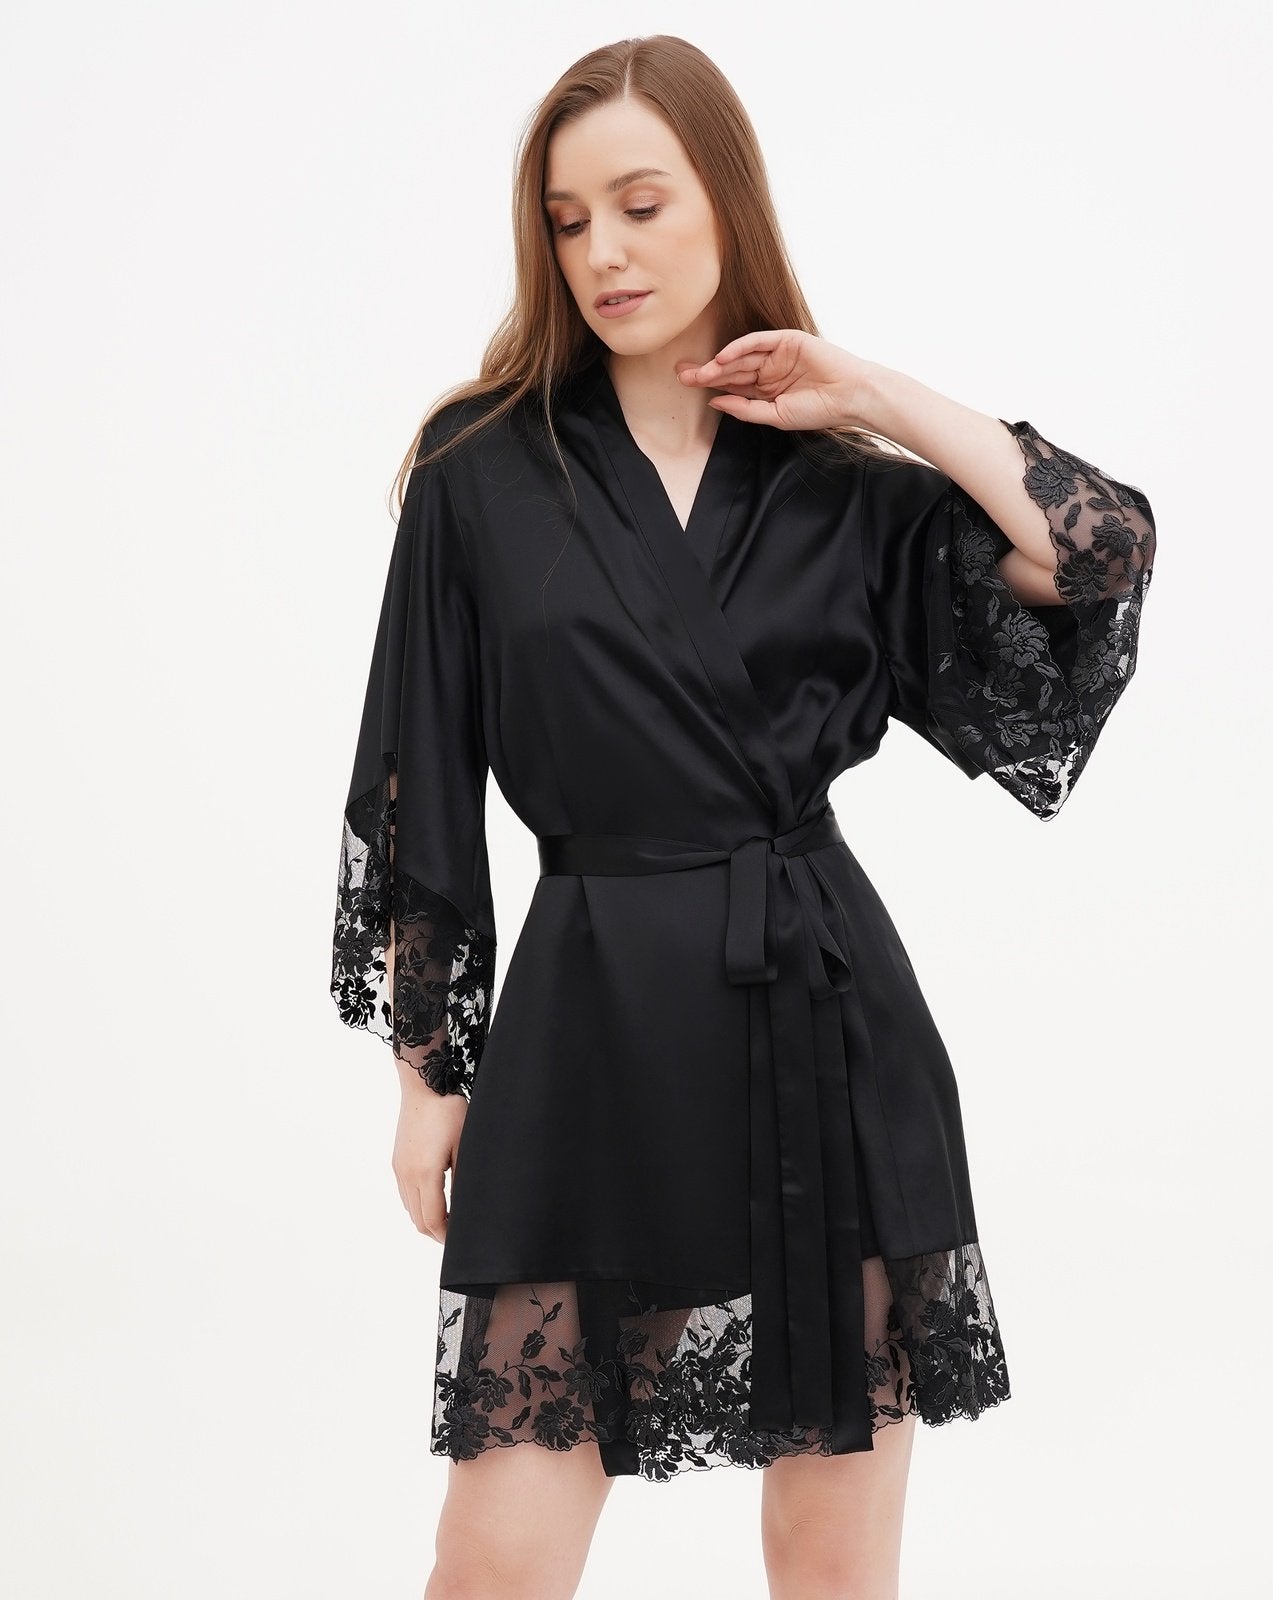 Buy Black Silk Robe Womens Satin Robe Knee Length Silky Robes Lightweight  Boxing Robe Dressing House Robes Soft Bathrobe Online at Low Prices in  India - Amazon.in